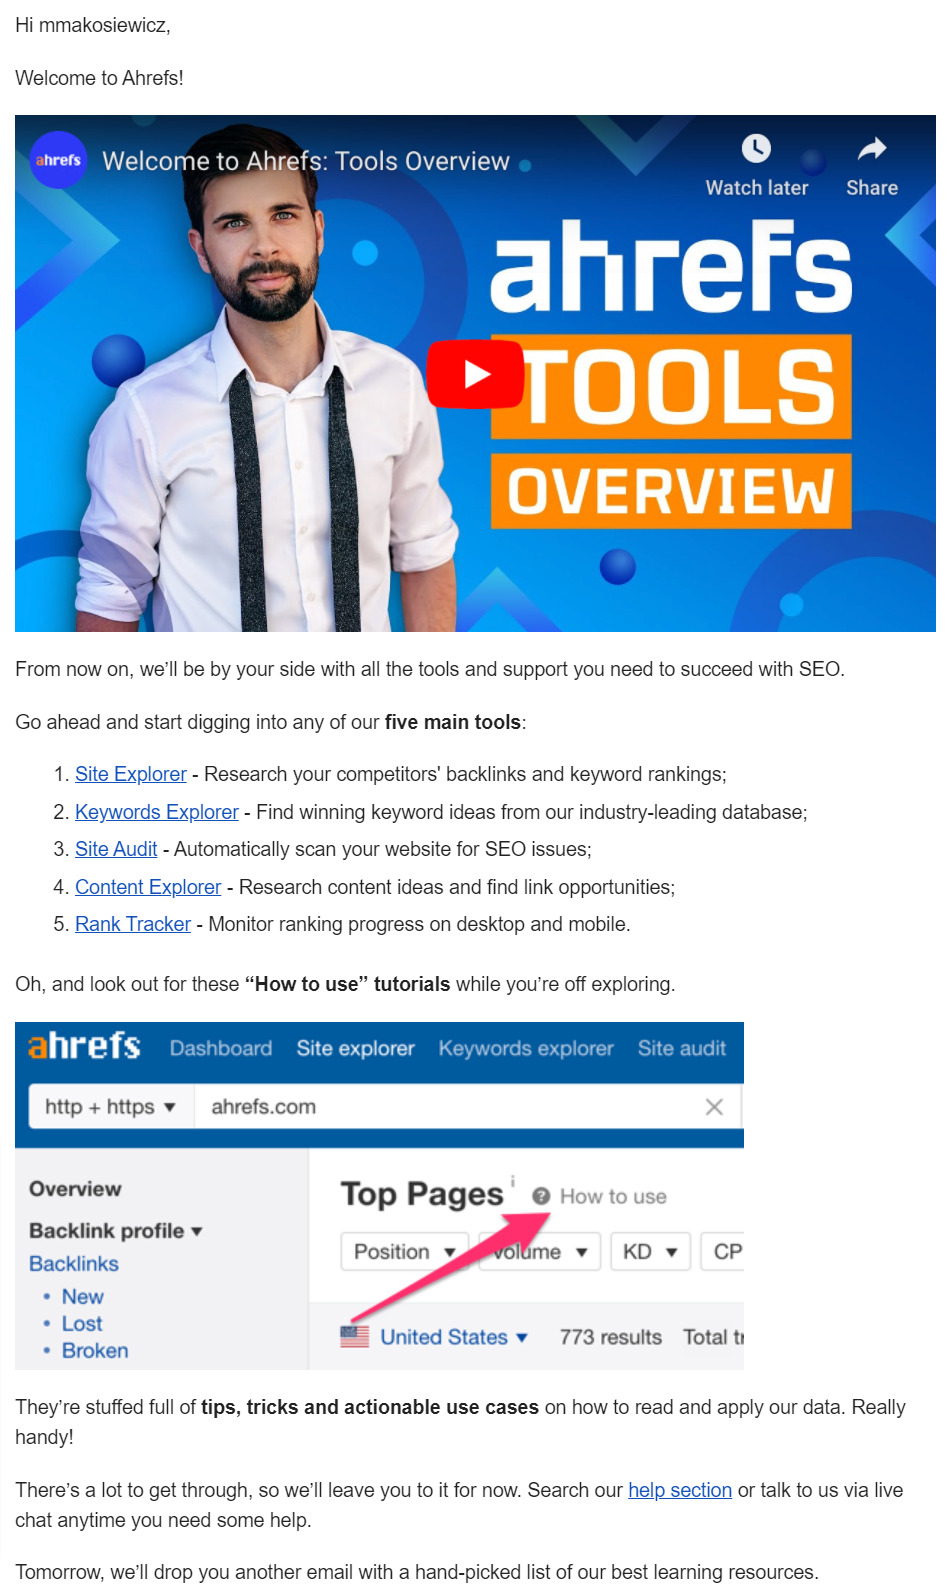 Ahrefs' "welcome" email with introductory video and list of our 5 main tools, each linked to more resources 